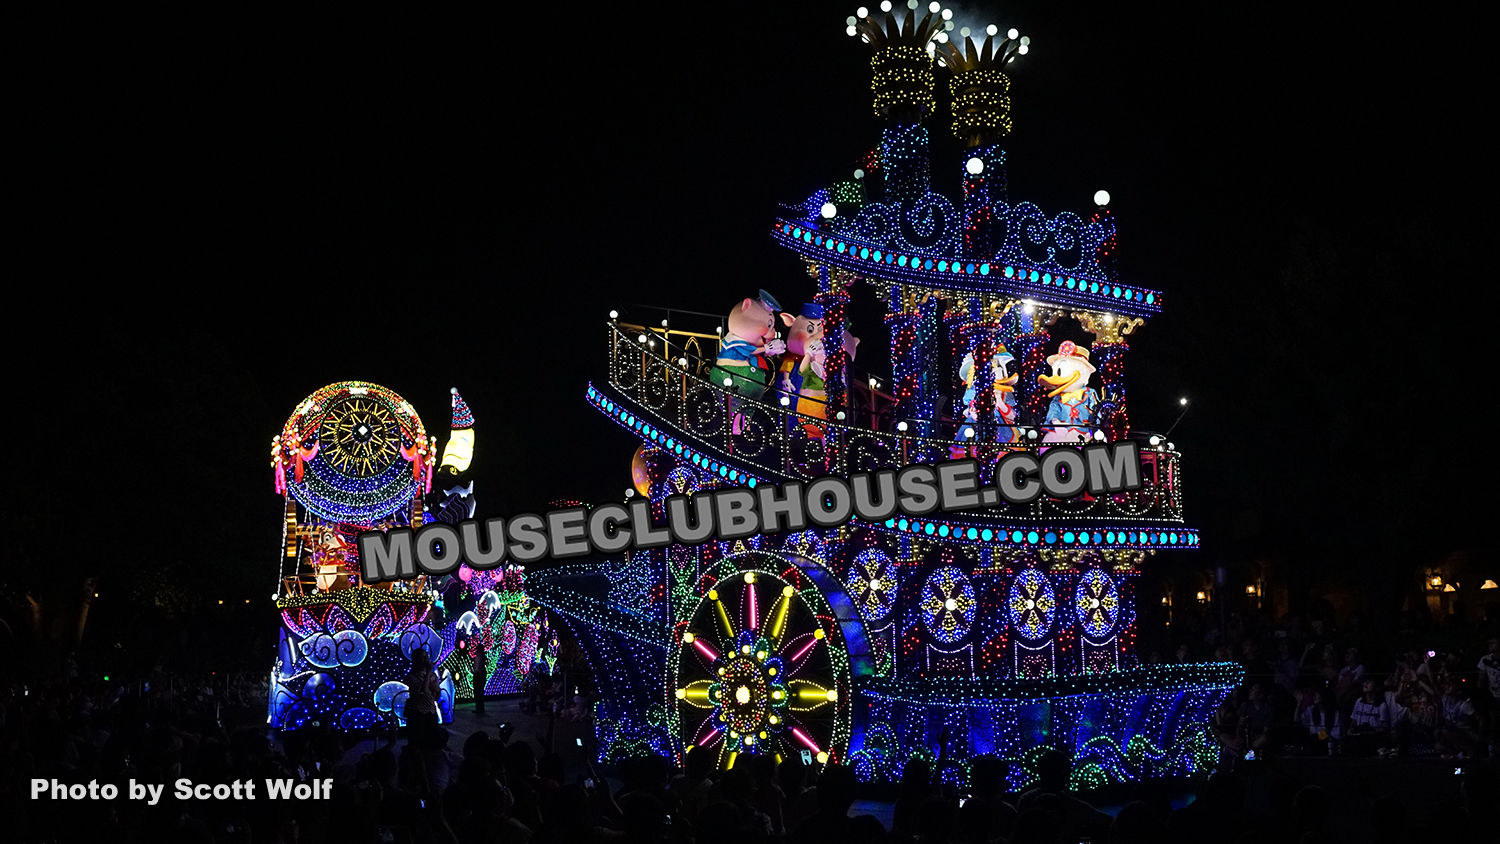 Tokyo Disneyland Electrical Parade Dream Lights "it's a small world" finale